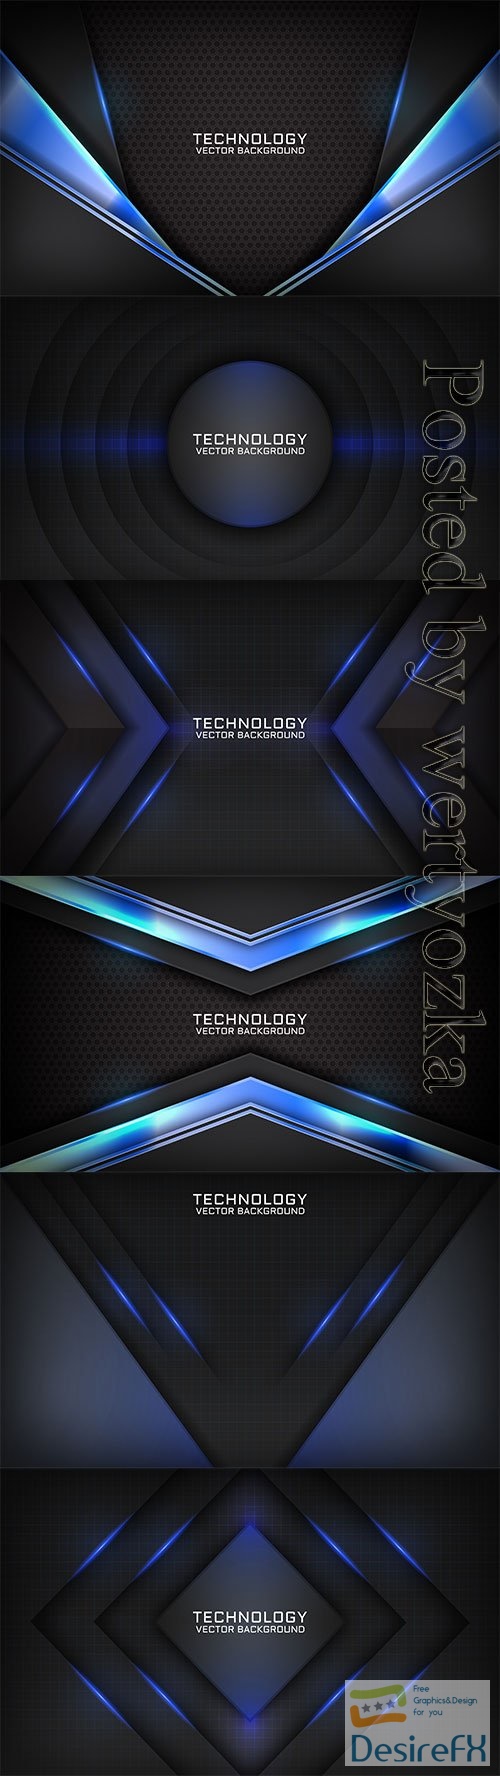 Abstract vector backgrounds with blue design